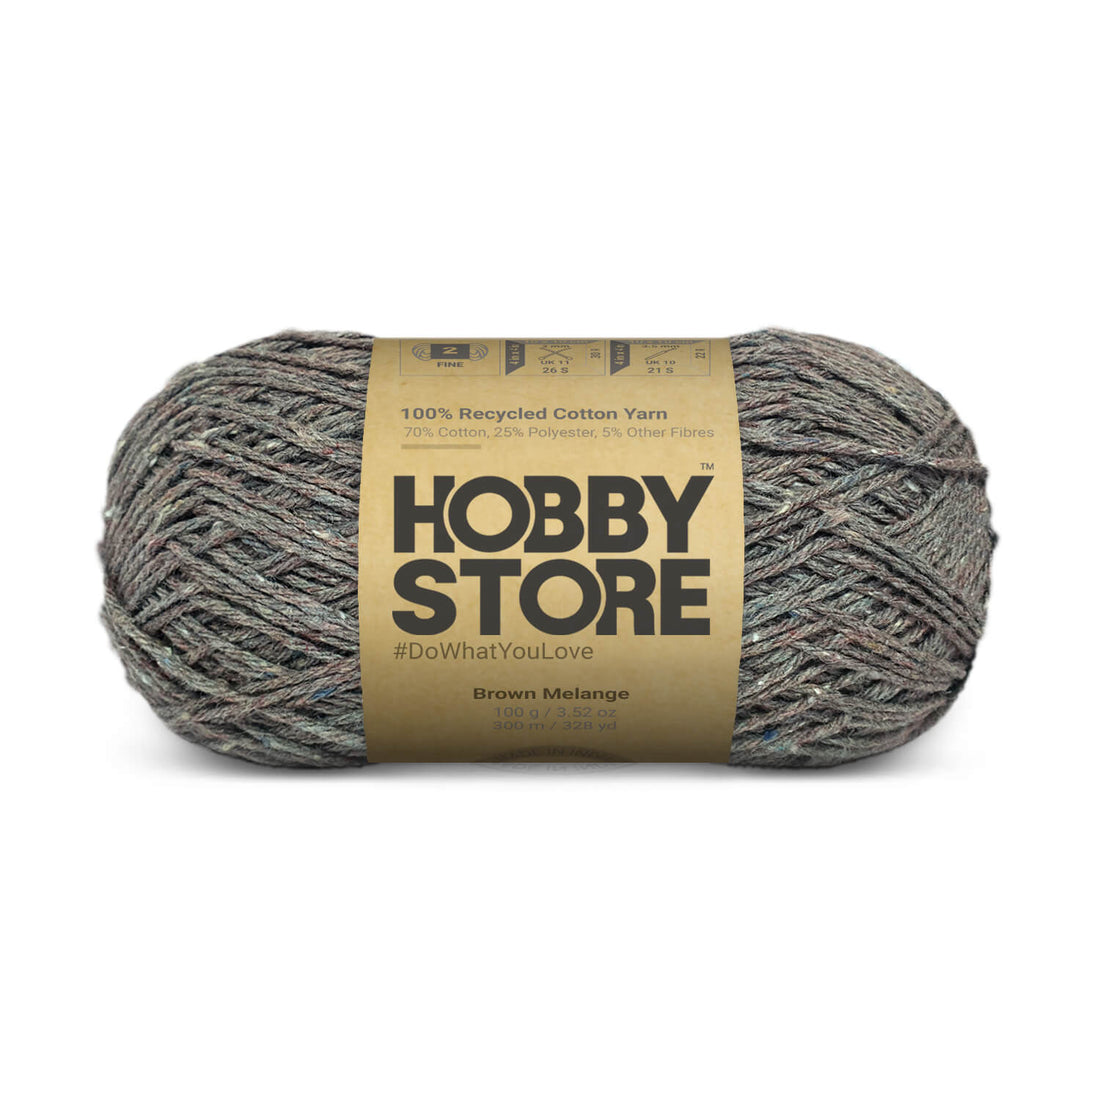 Hobby Store Recycled Cotton Yarn - Brown Melange 8430